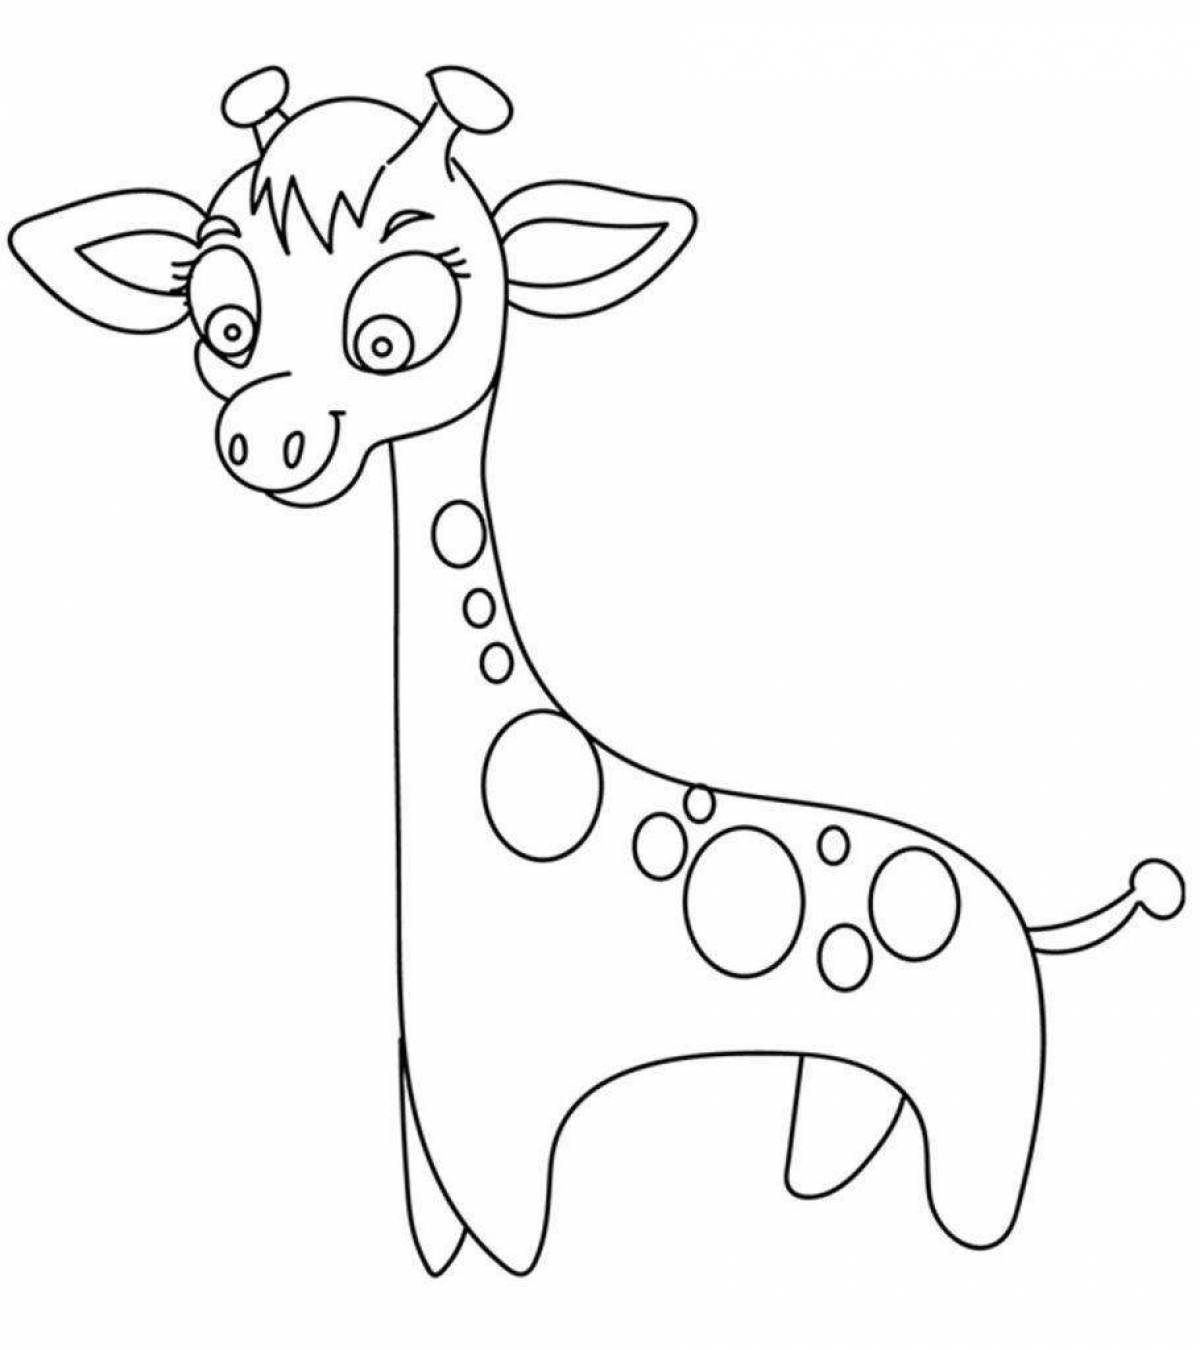 A fascinating giraffe coloring book for 3-4 year olds